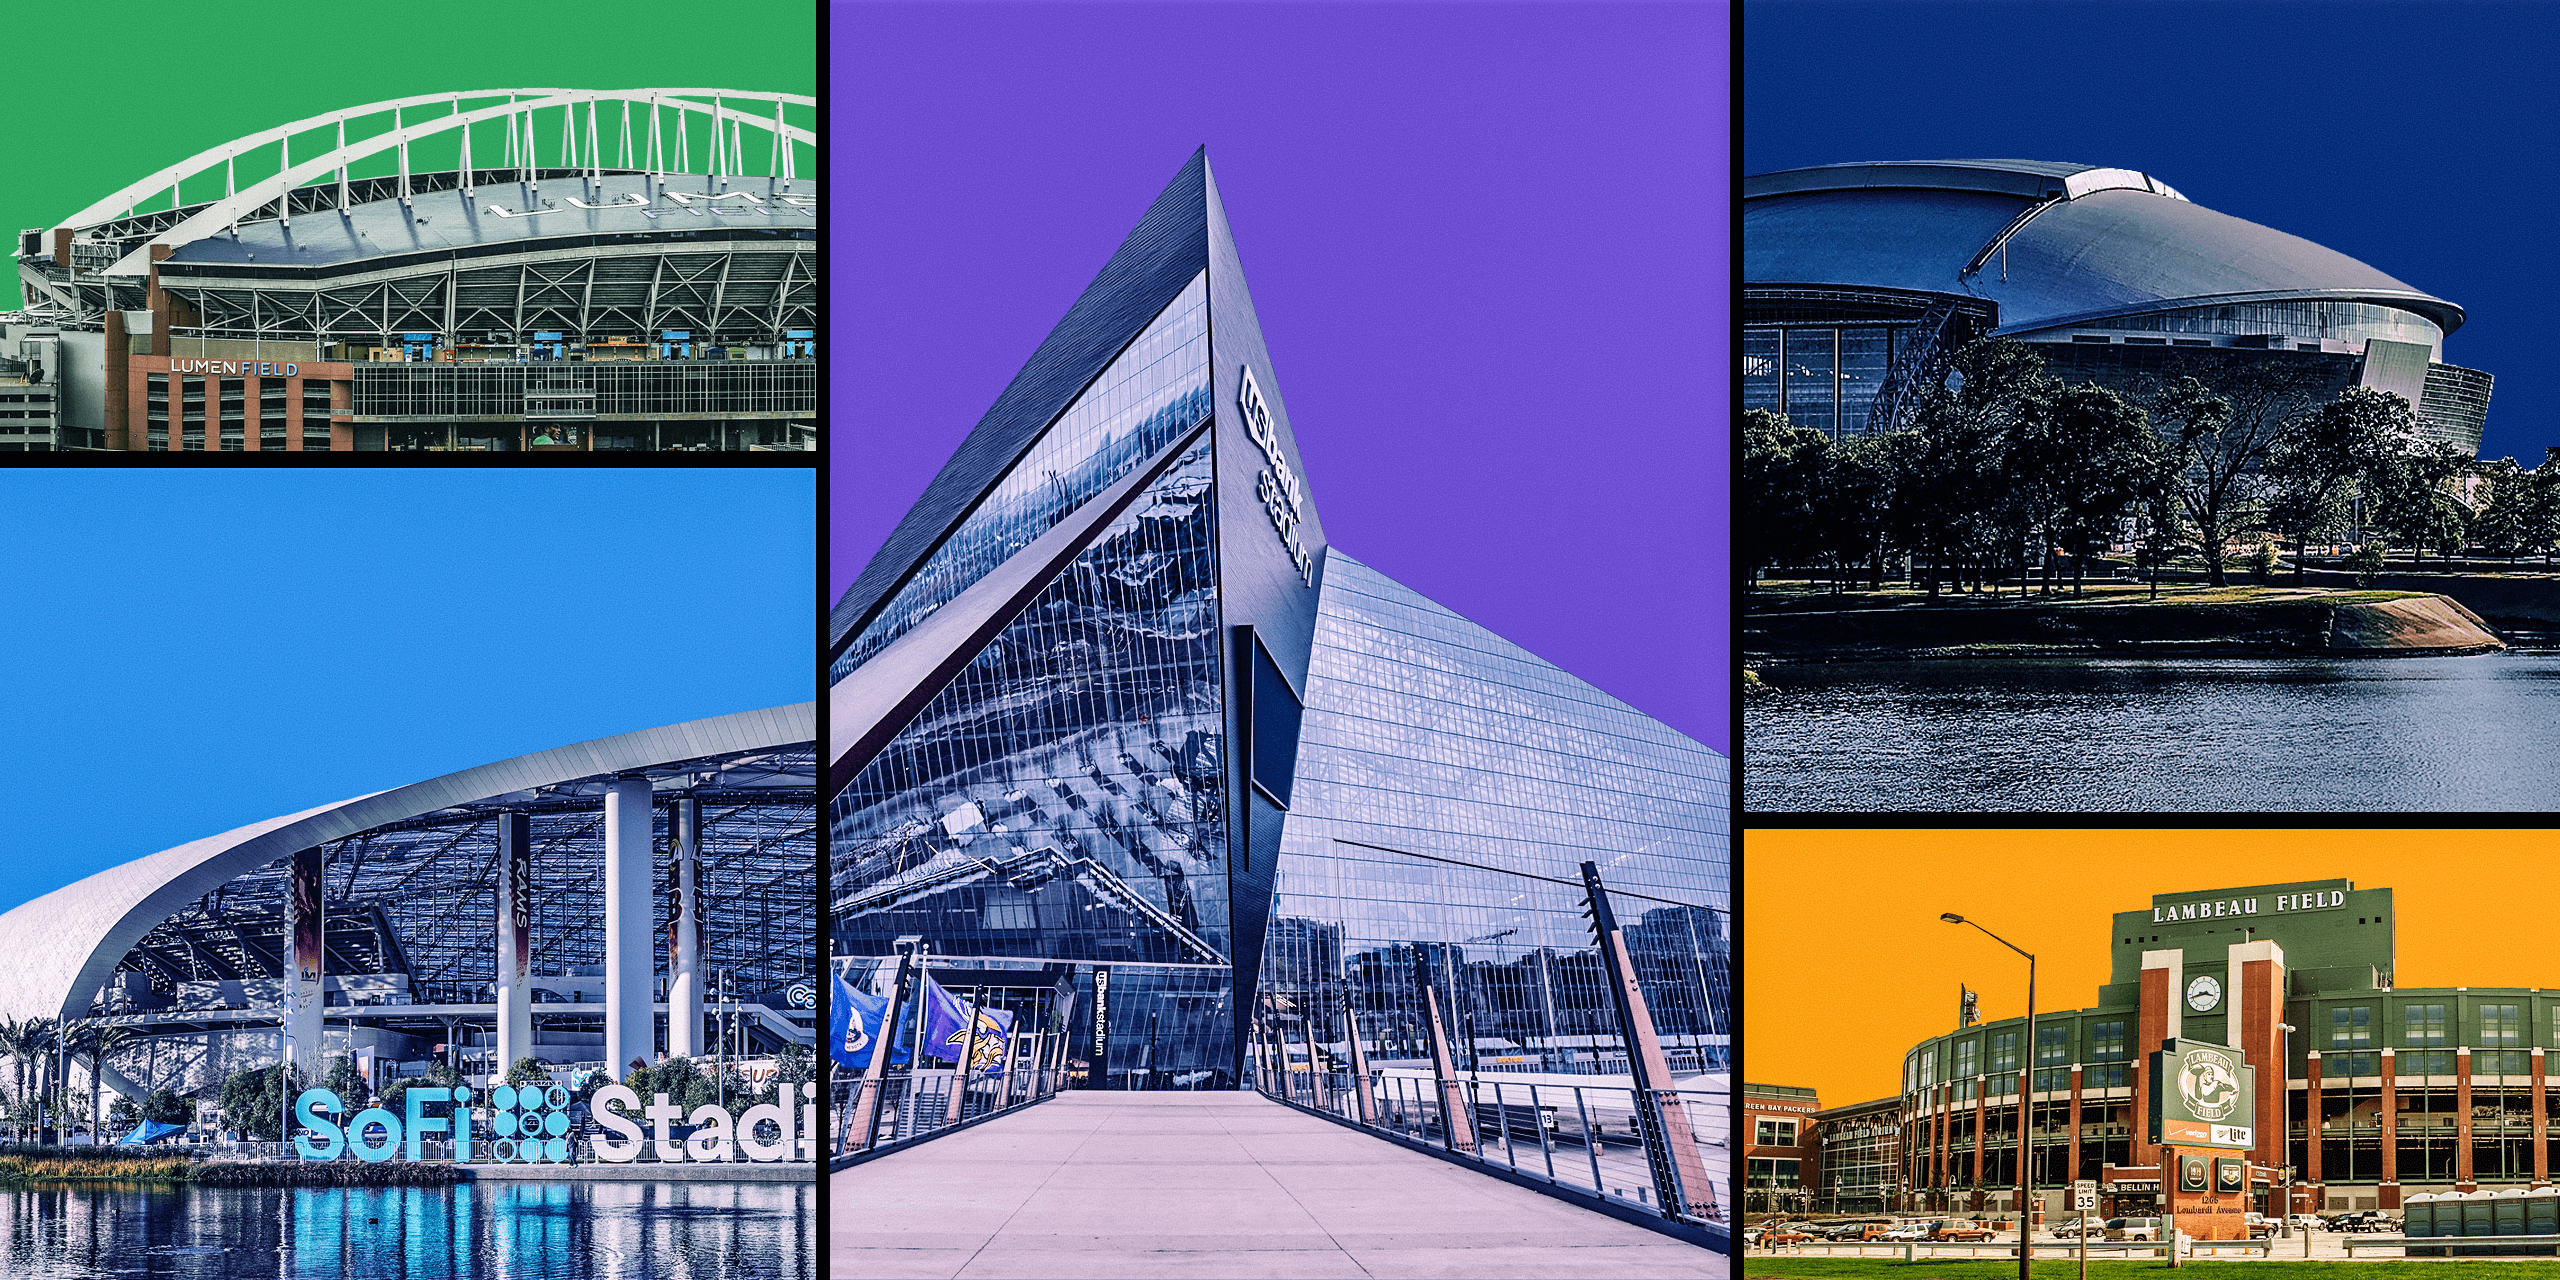 Top Ranking - Looking At Some Of The Best Nfl Stadiums